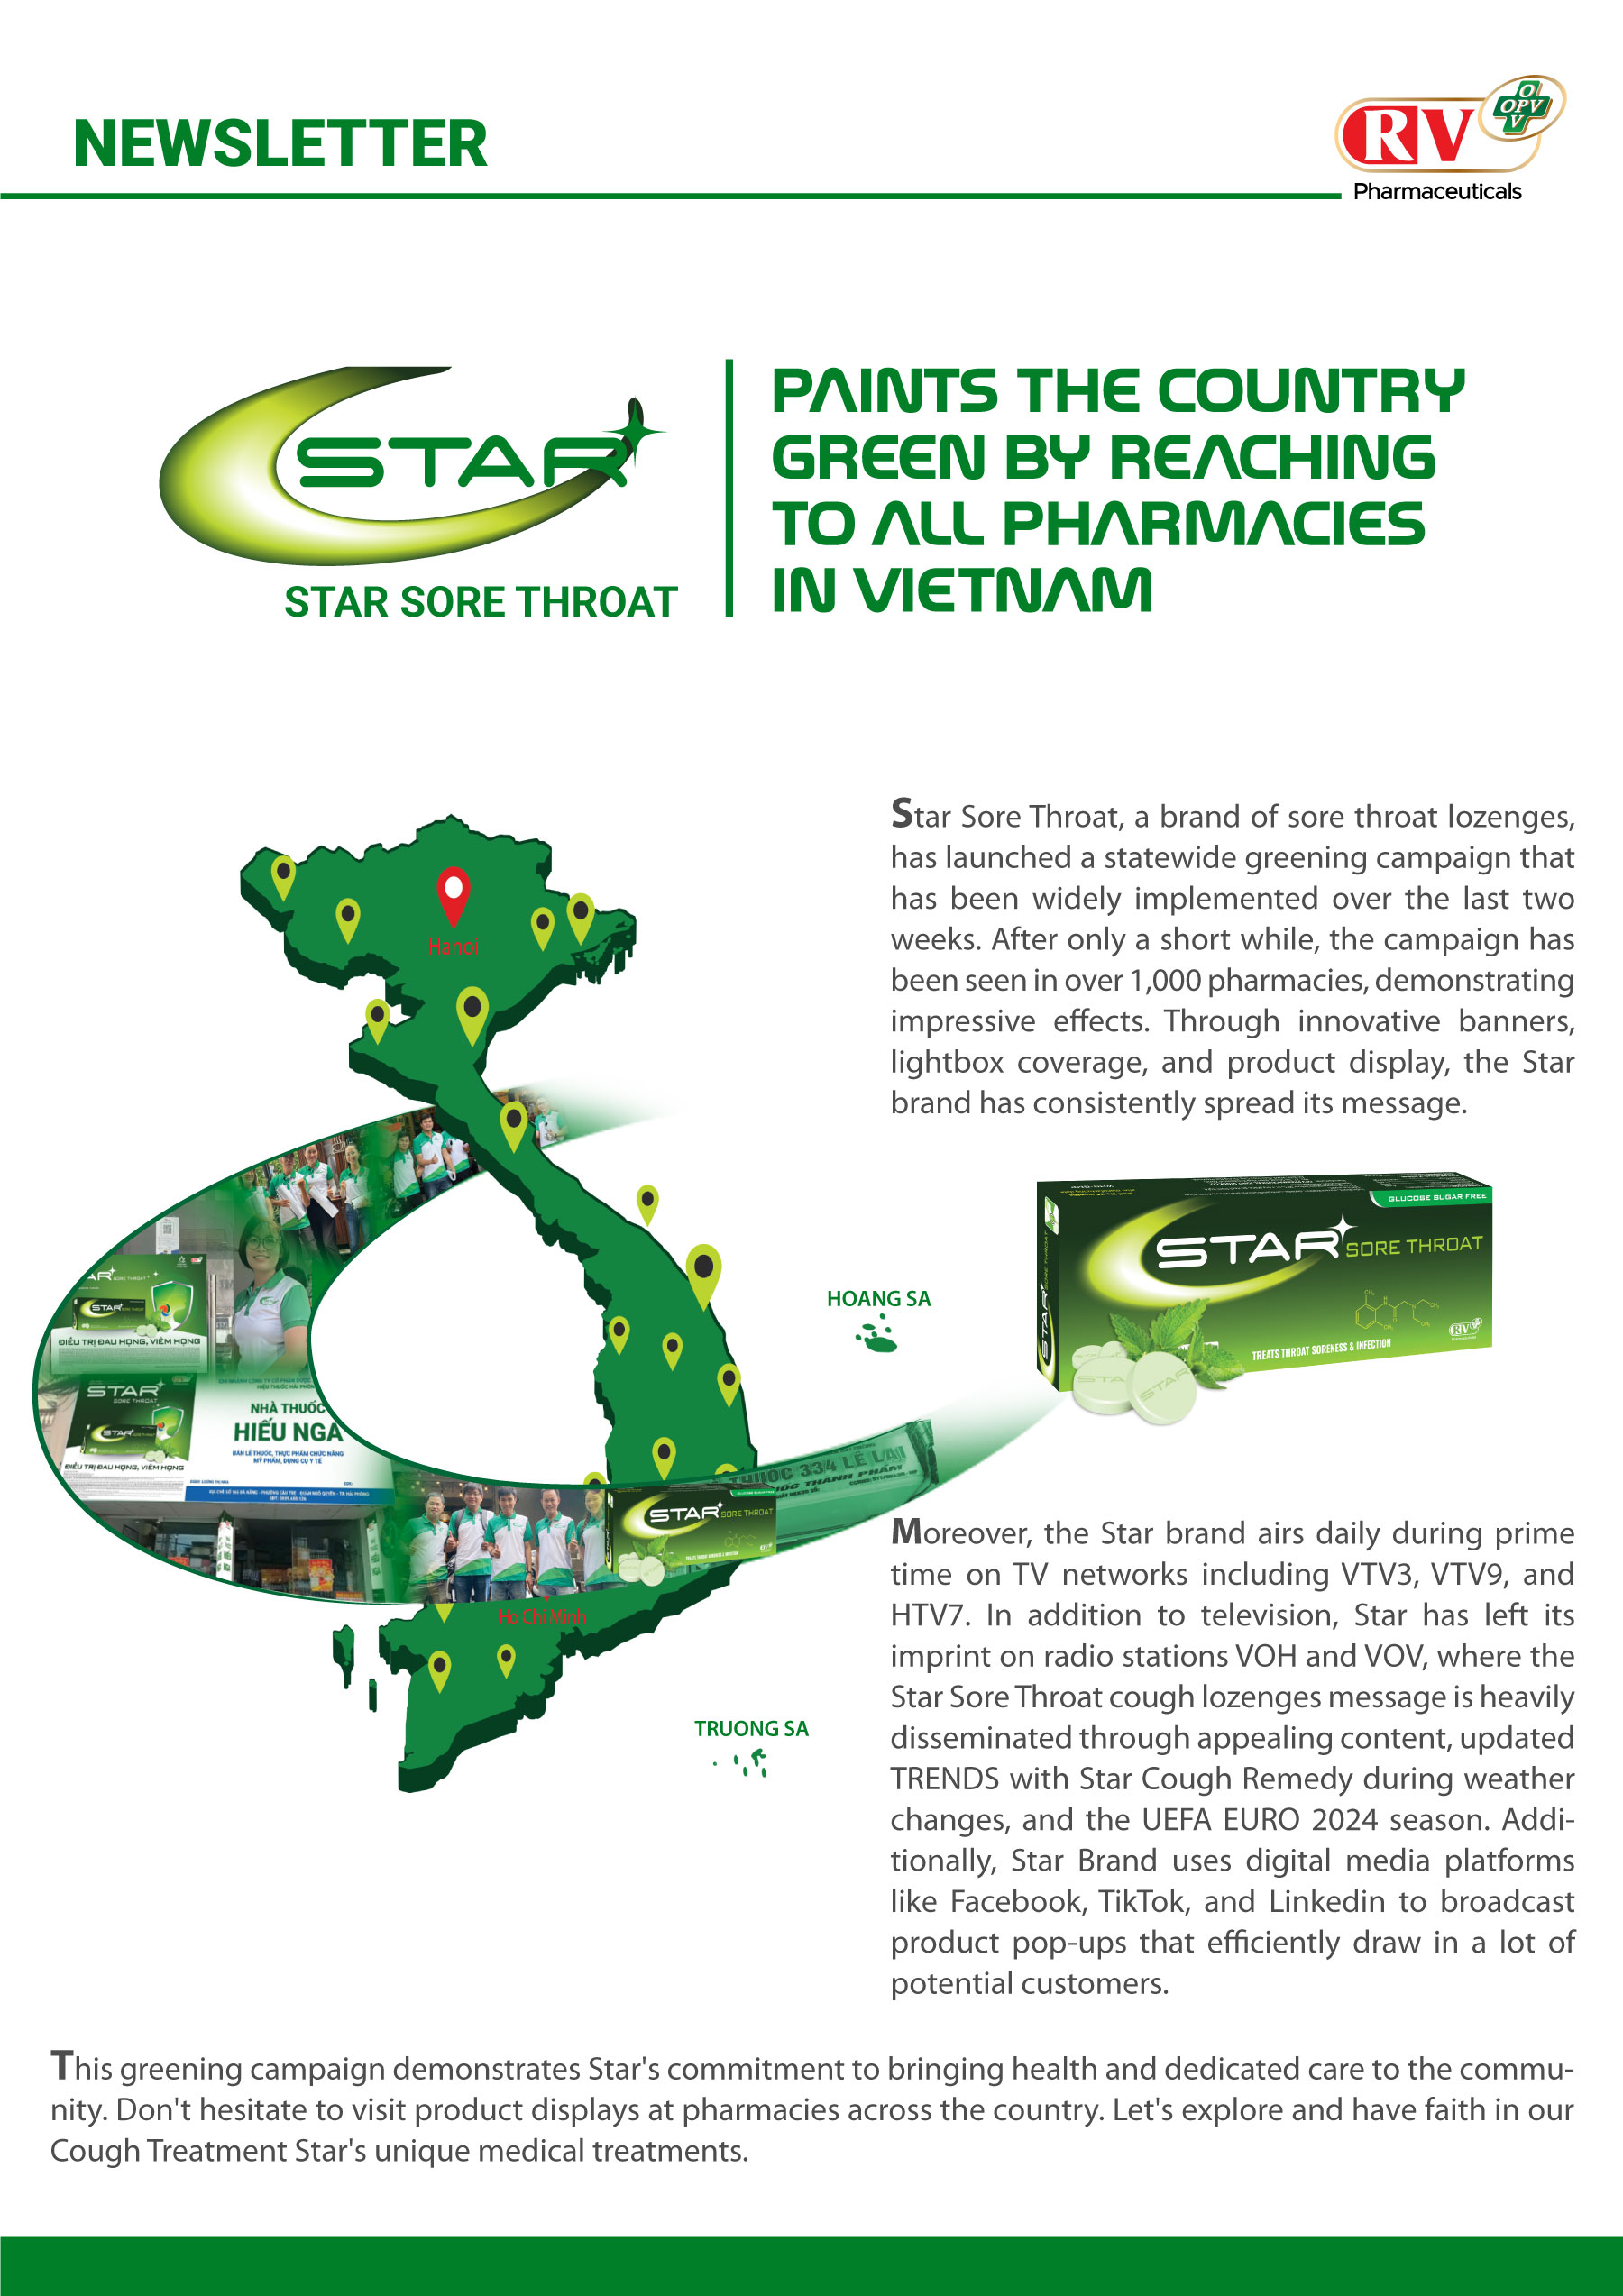 STAR SORE THROAT PAINTS THE COUNTRY GREEN BY REACHING TO ALL PHARMACIES IN VIETNAM